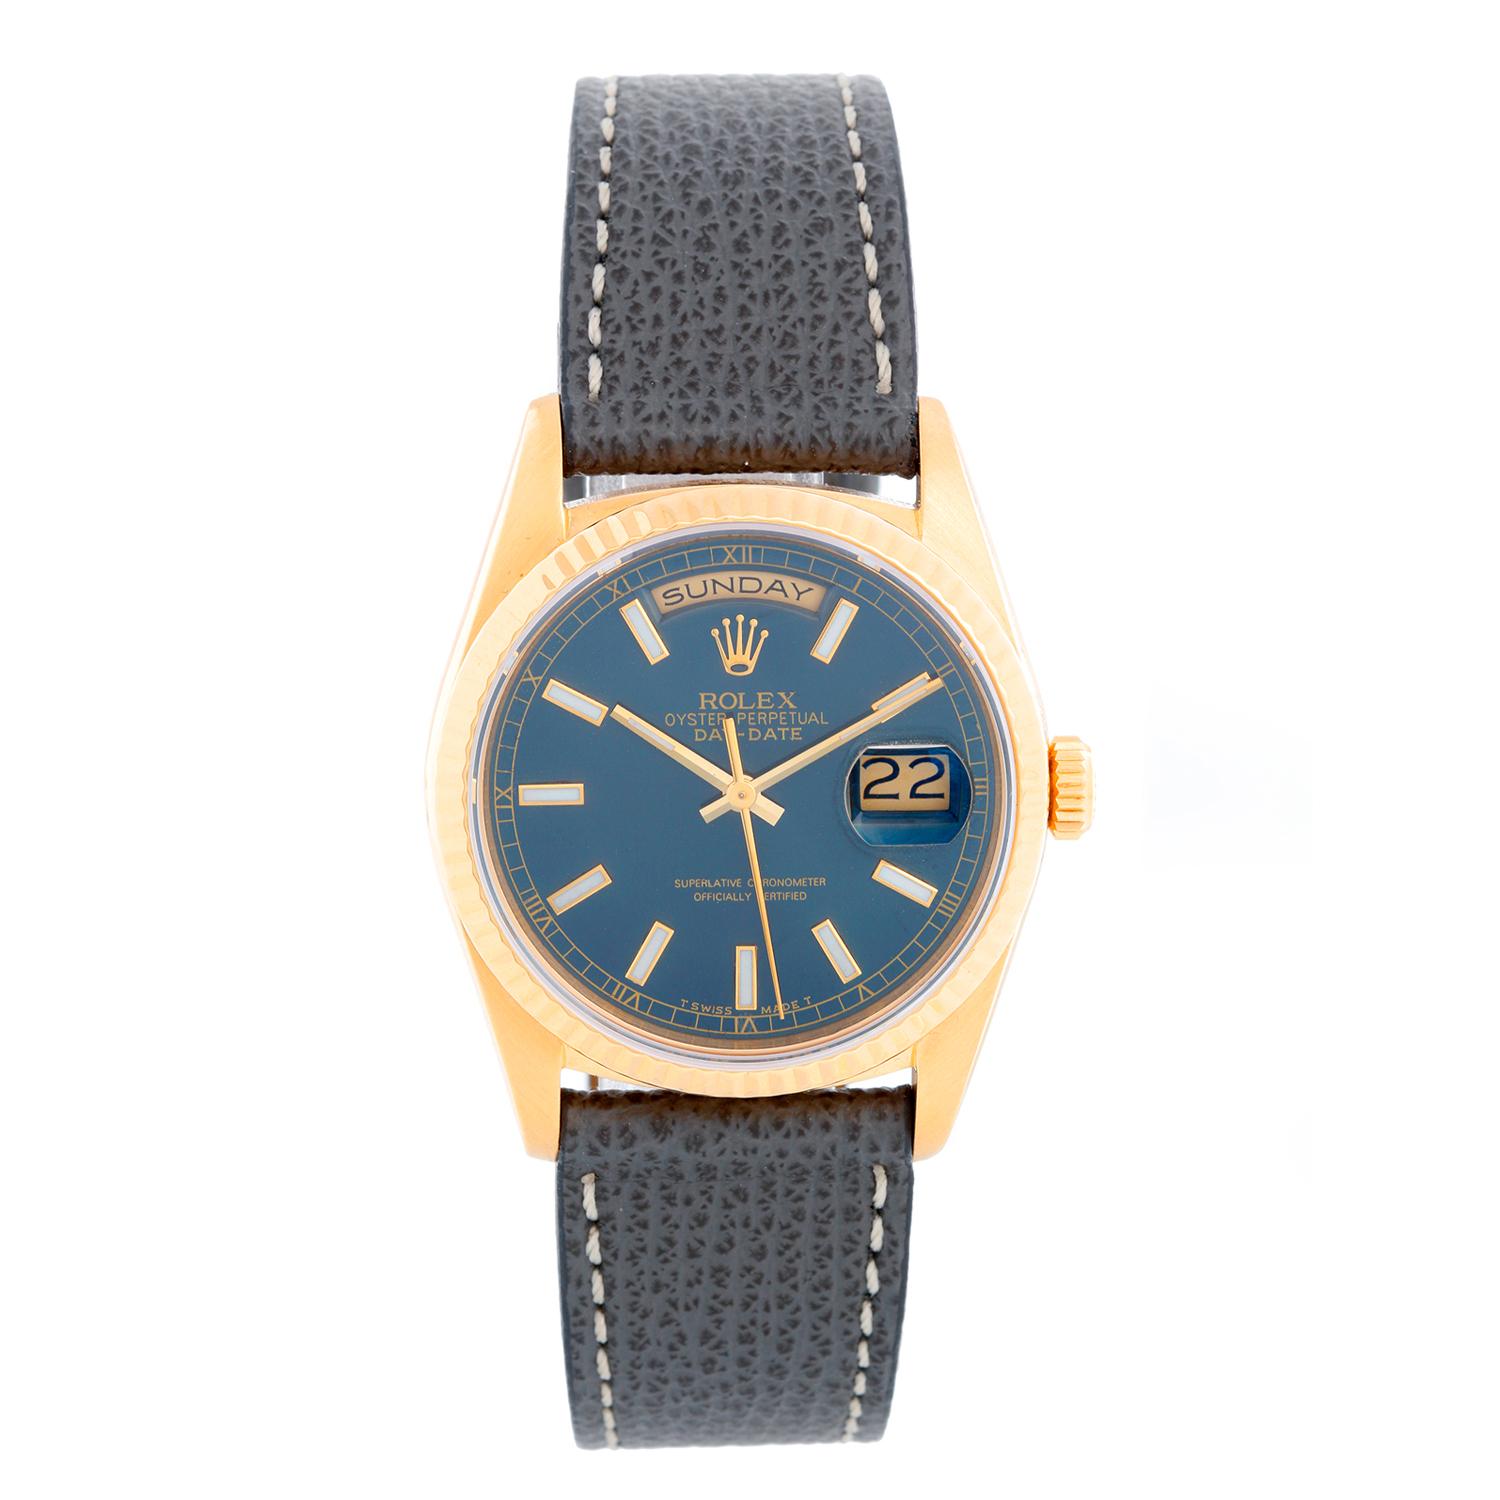 Men's Gold Rolex President Day-Date on a Strap Watch 18238 - Automatic winding, 31 jewels, double Quickset, sapphire crystal. 18k yellow gold case and fluted bezel (36mm diameter). Custom blue/ green dial. Grey leather strap with tang buckle .